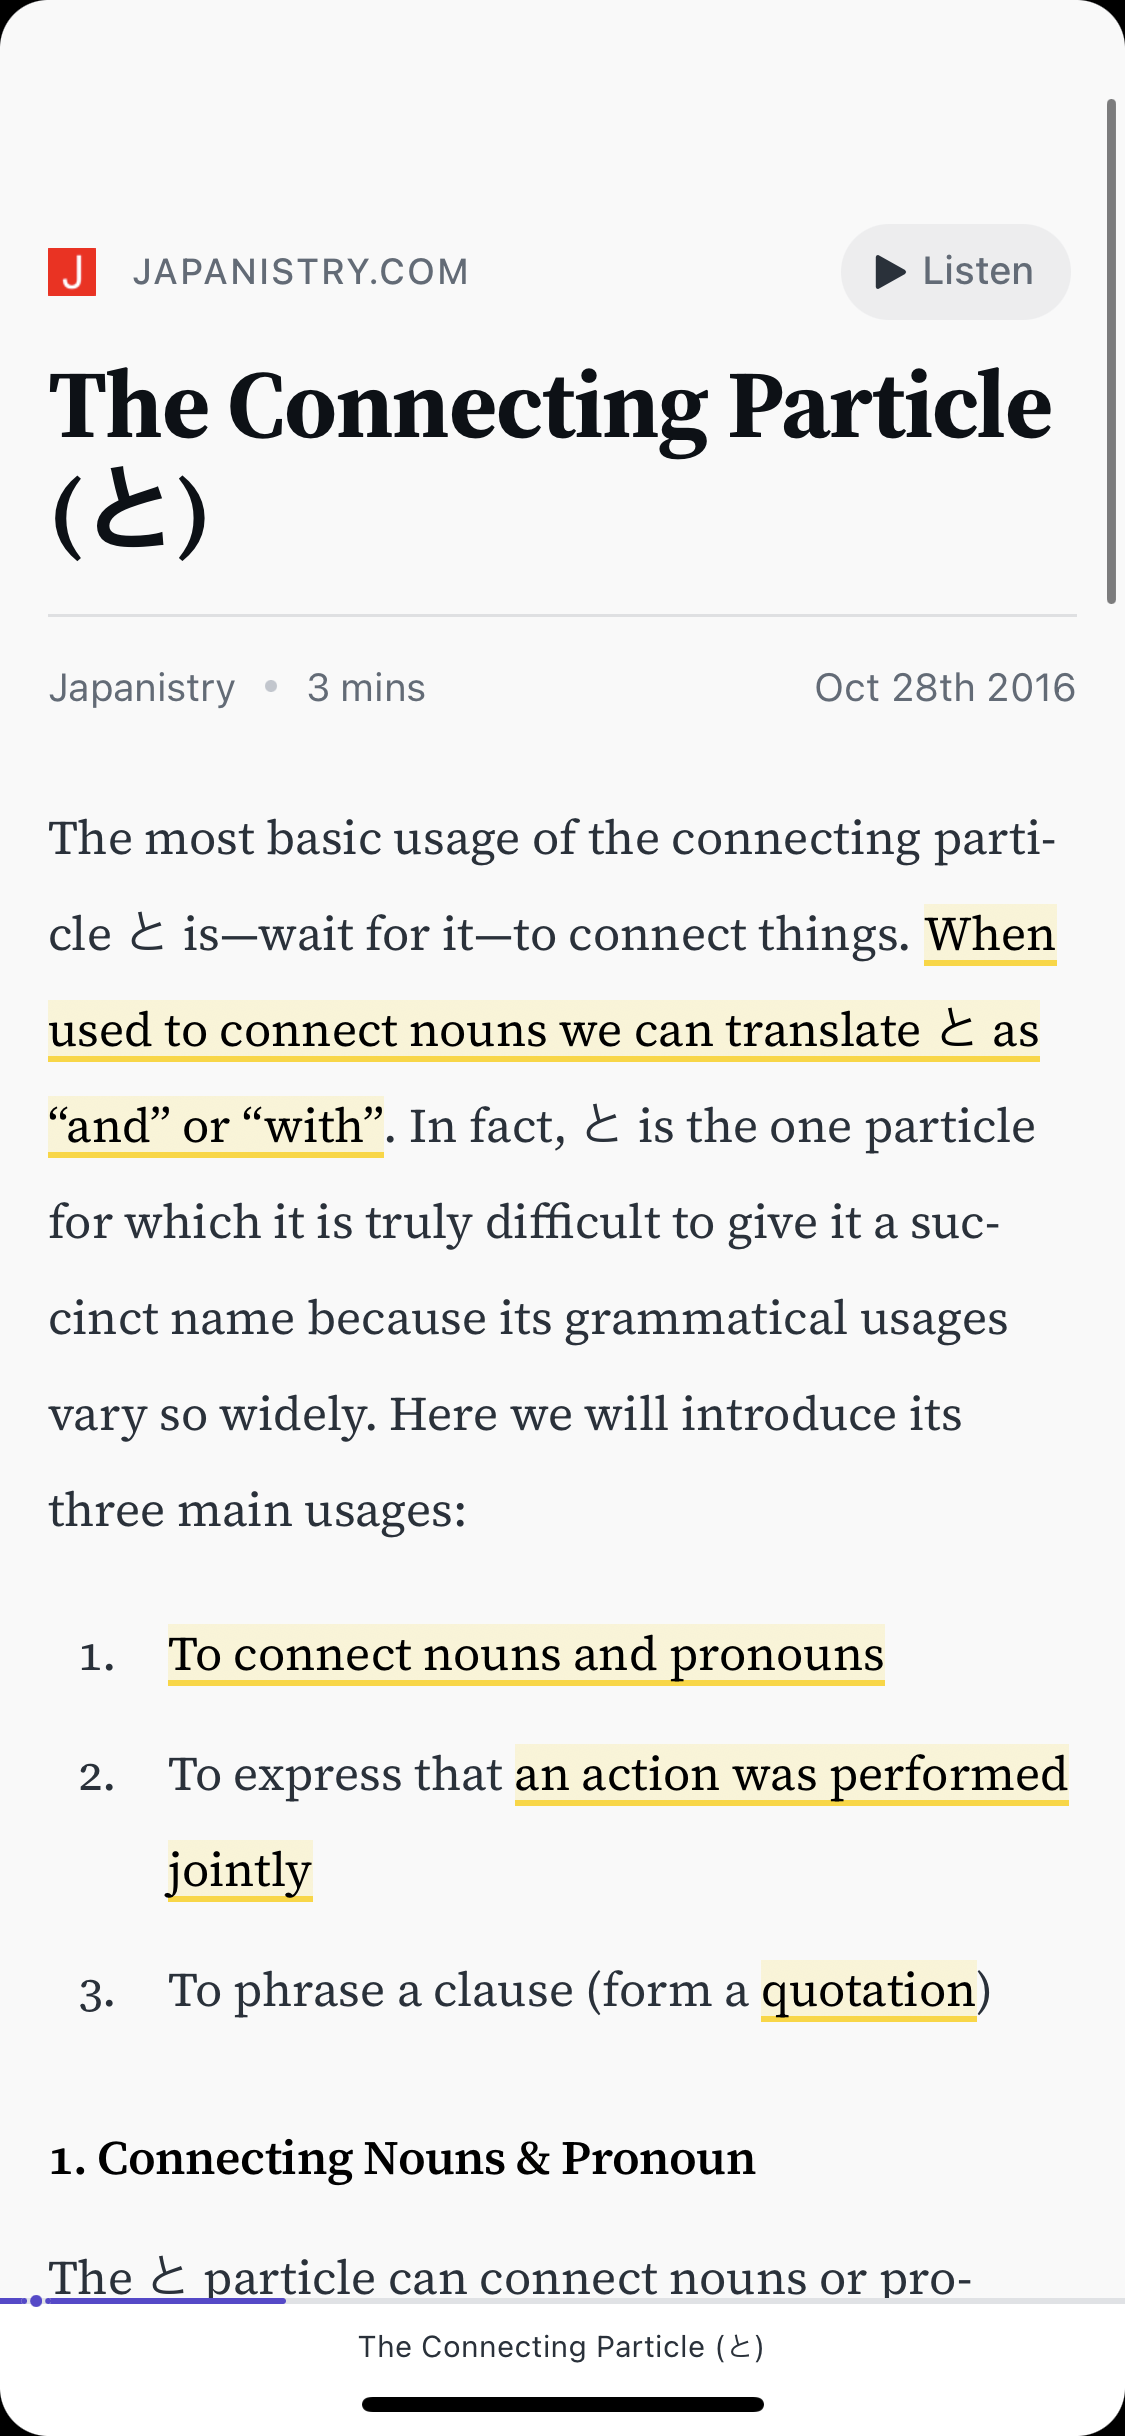 Reader by Readwise left out all the Japanese example sentences when parsing.